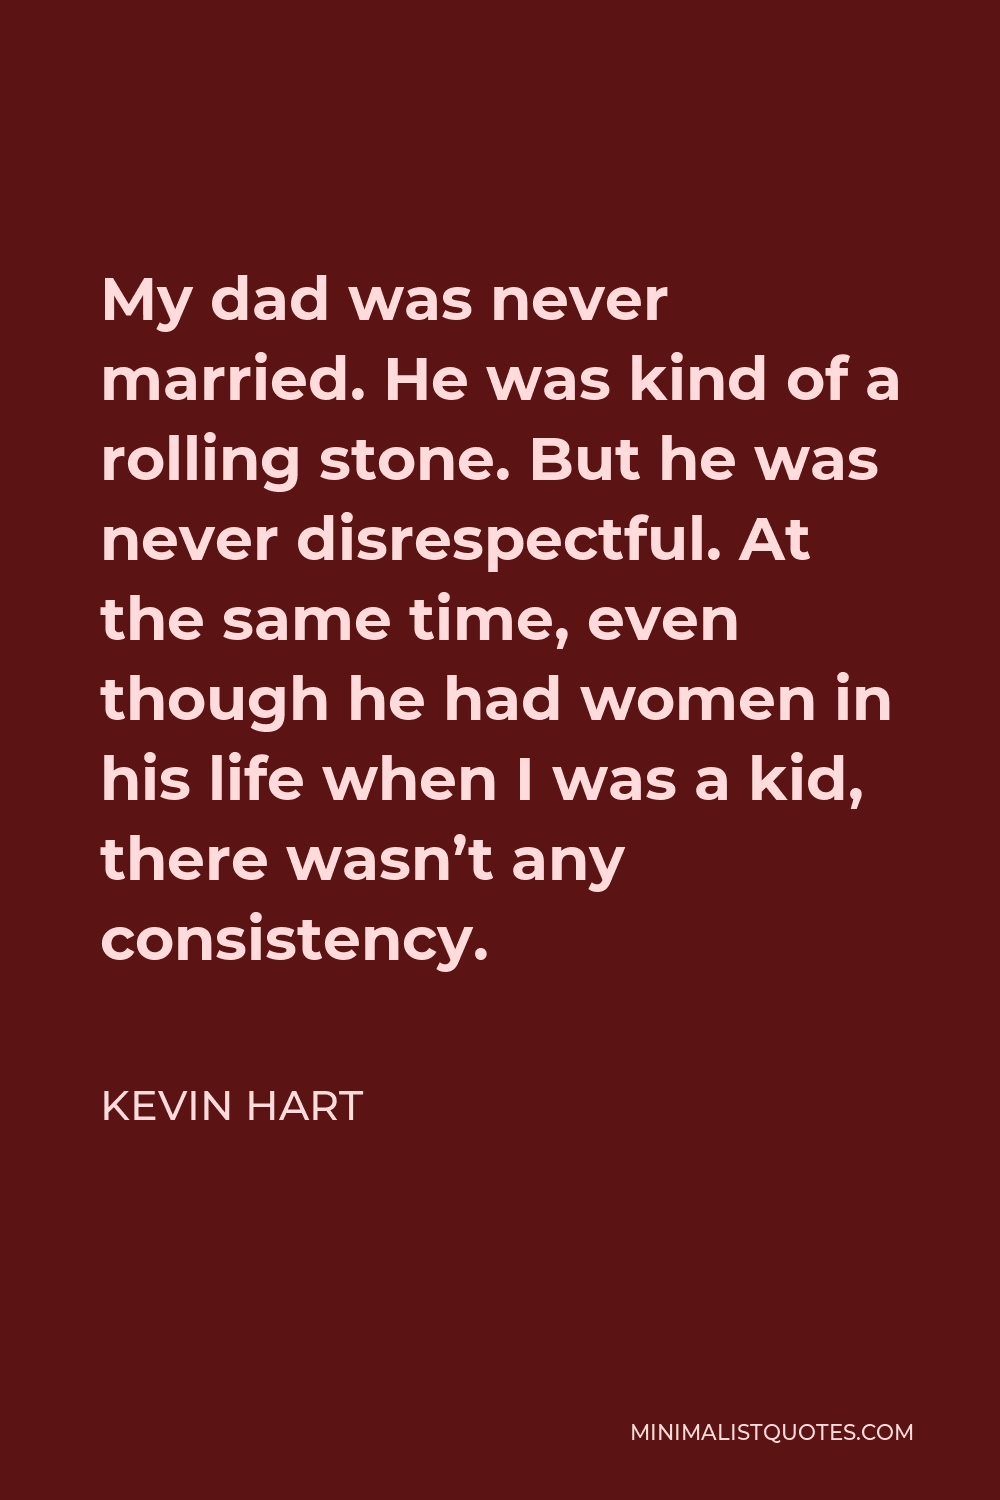 Kevin Hart Quote: “I stayed true to my dreams and, eventually, they came  true.”